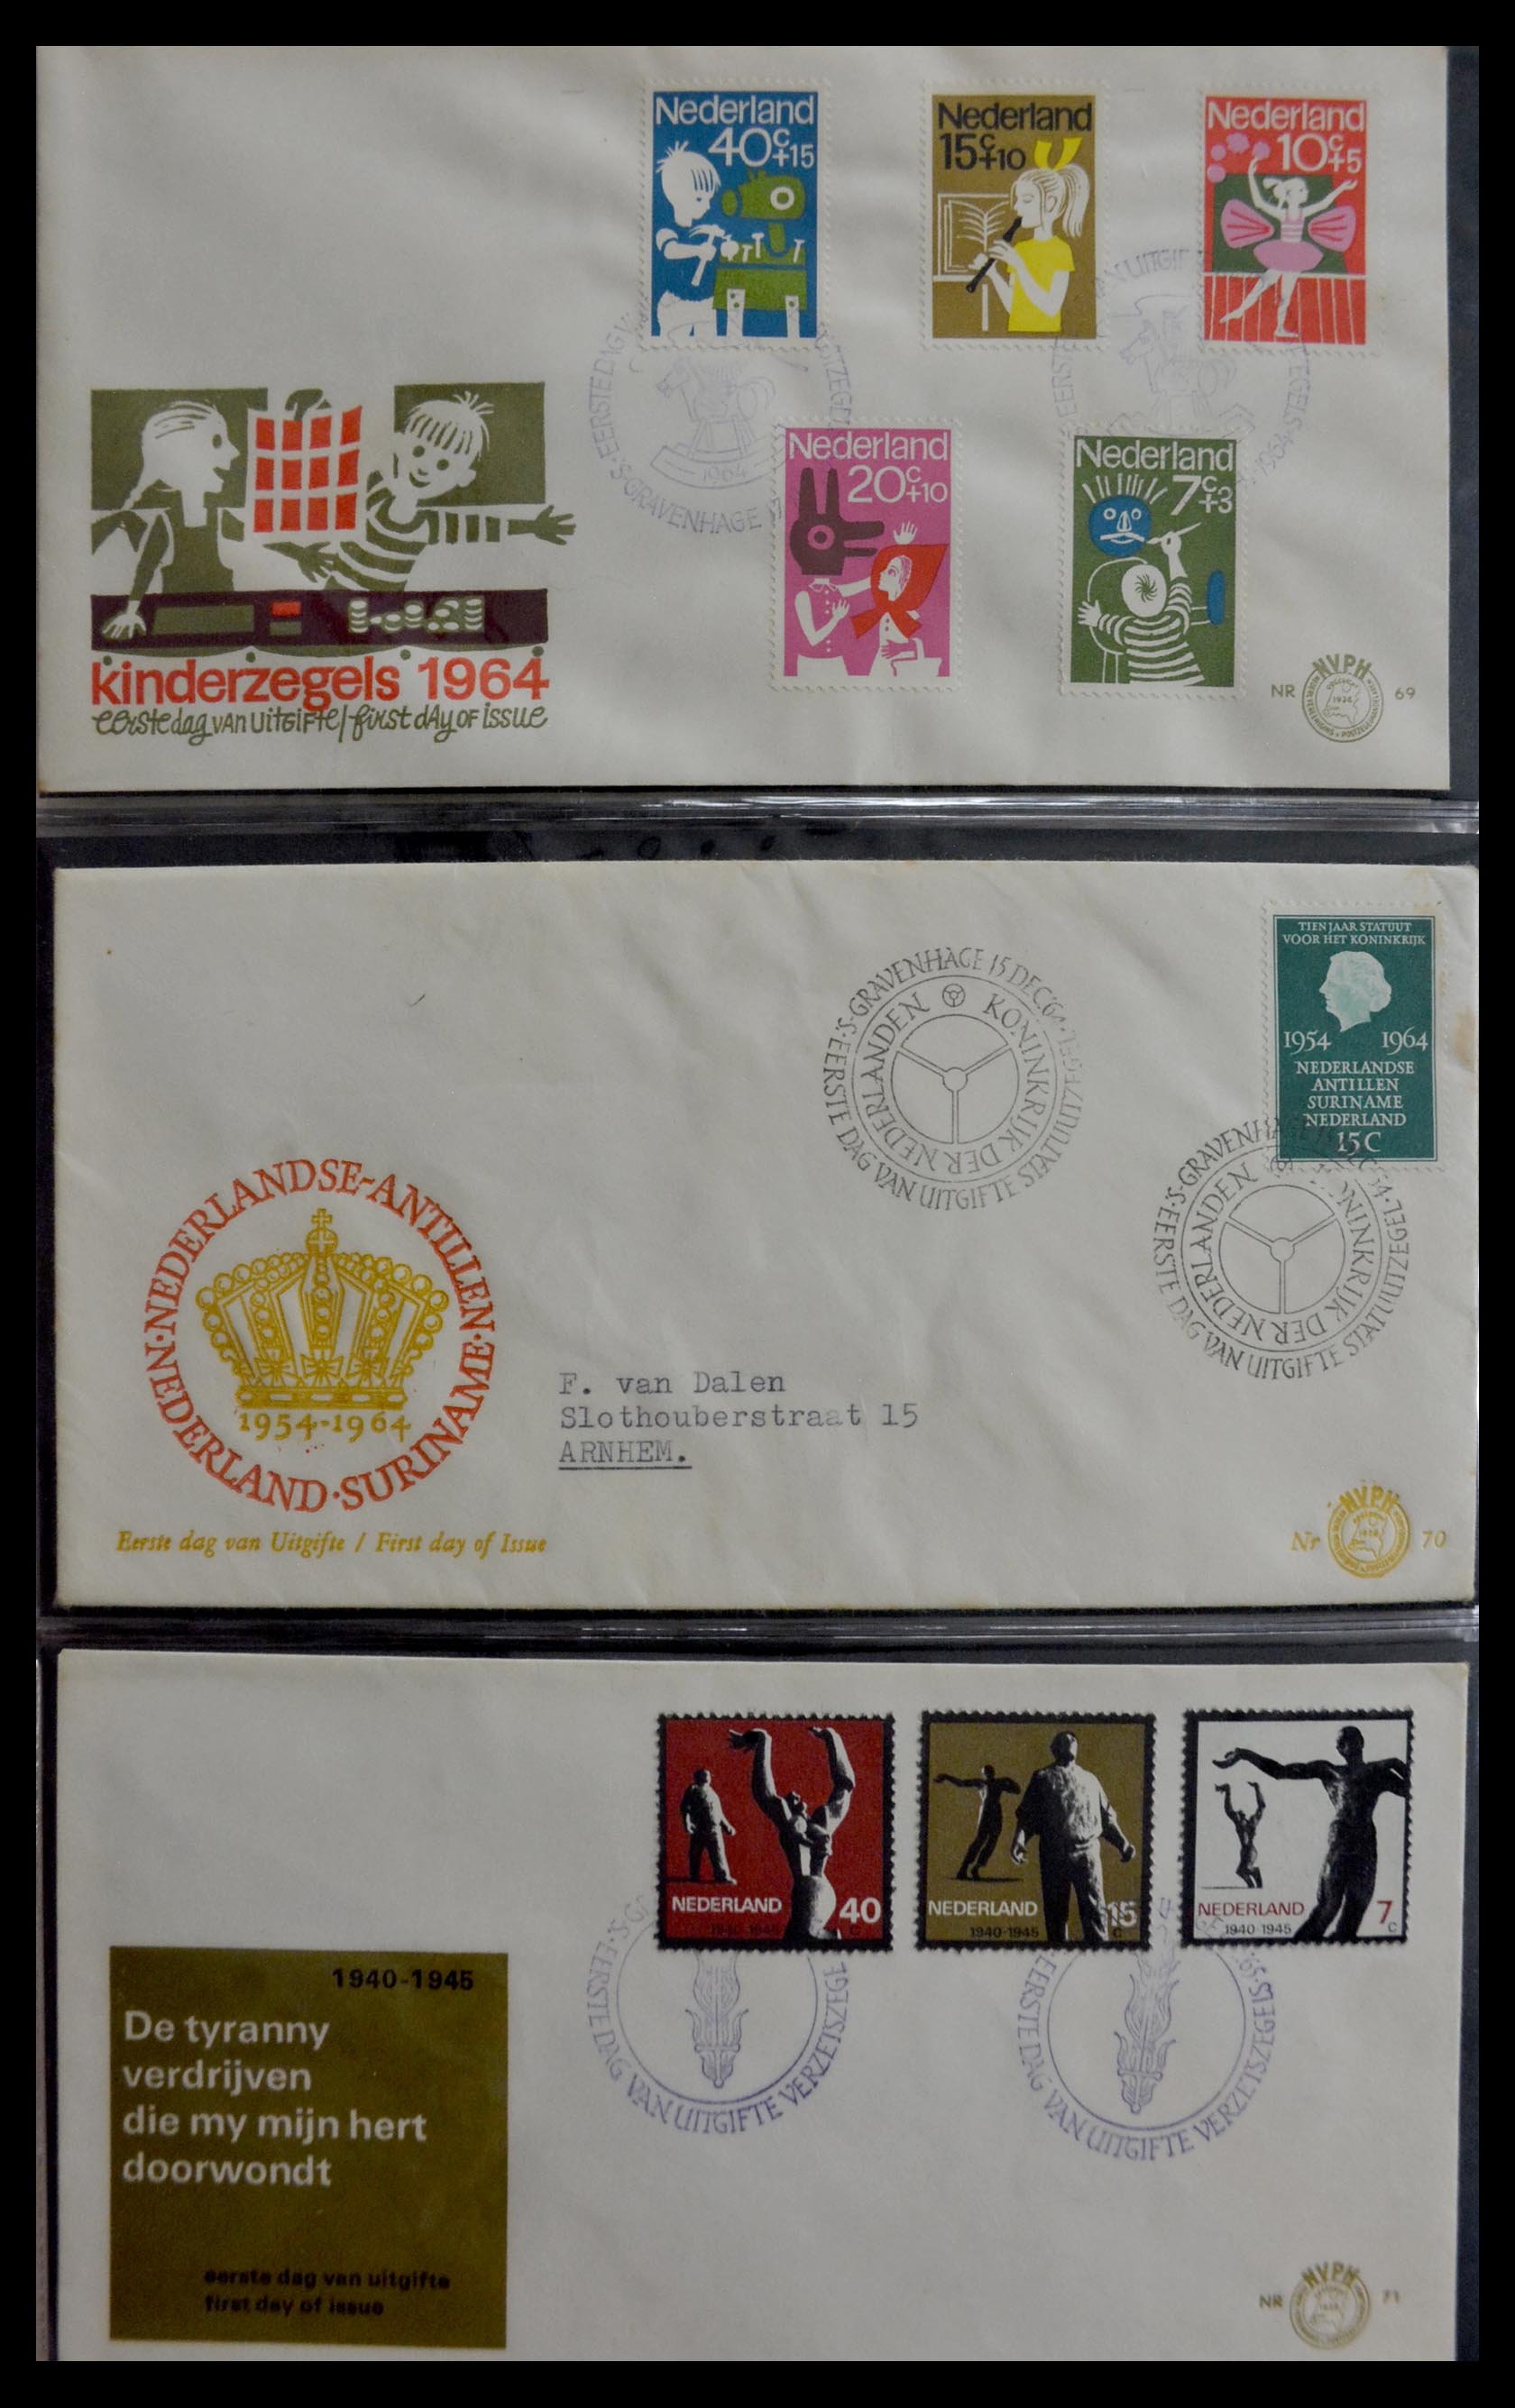 29470 024 - 29470 Netherlands FDC's 1950-1967.